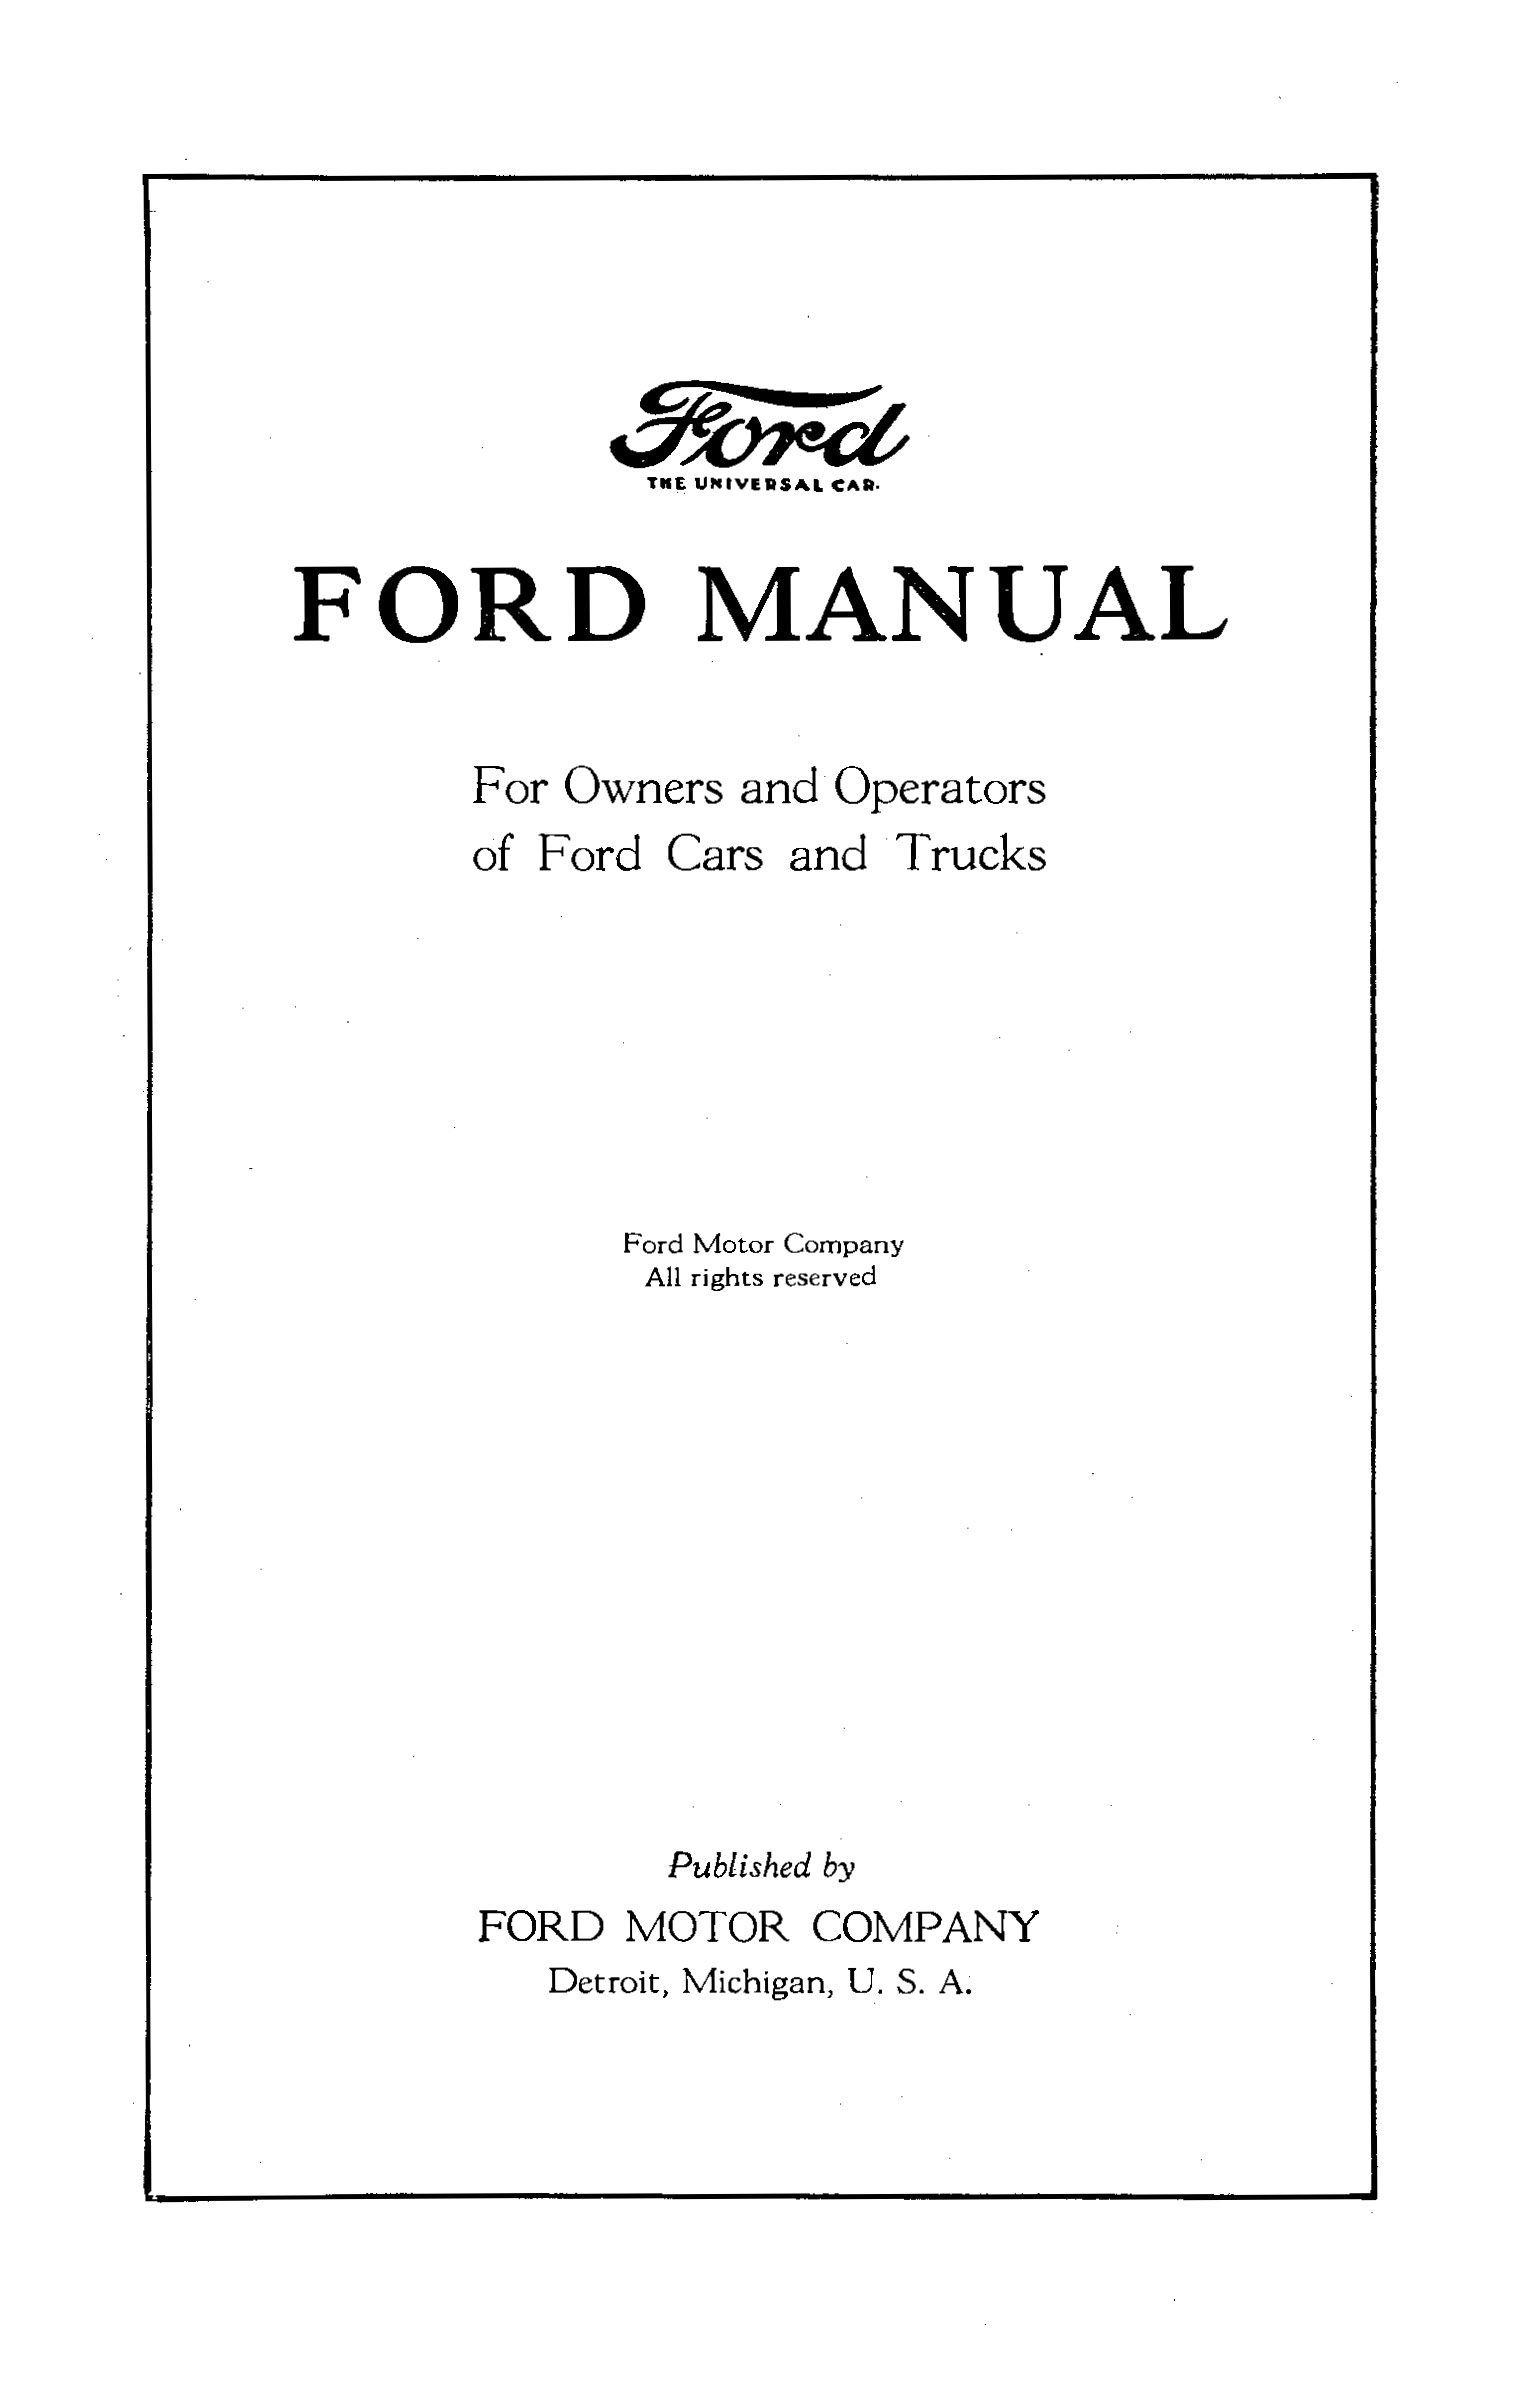 1925_Ford_Owners_Manual-01